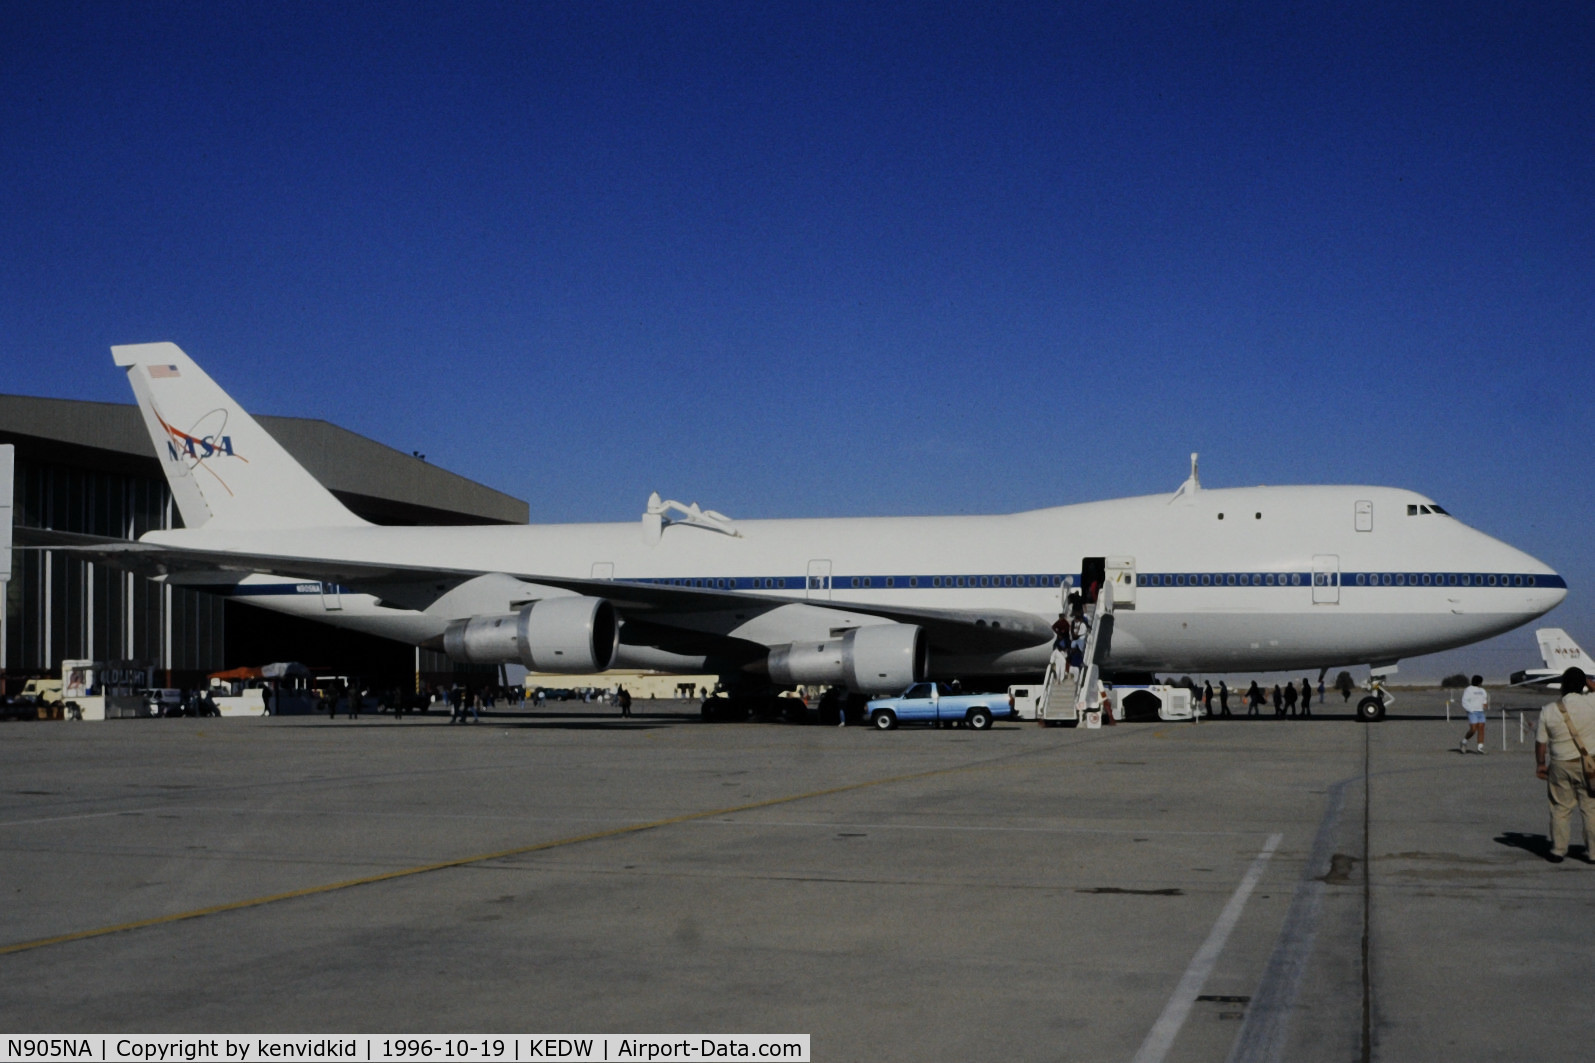 N905NA, 1970 Boeing 747-123 C/N 20107, On static display at the Edwards Open House 1996.